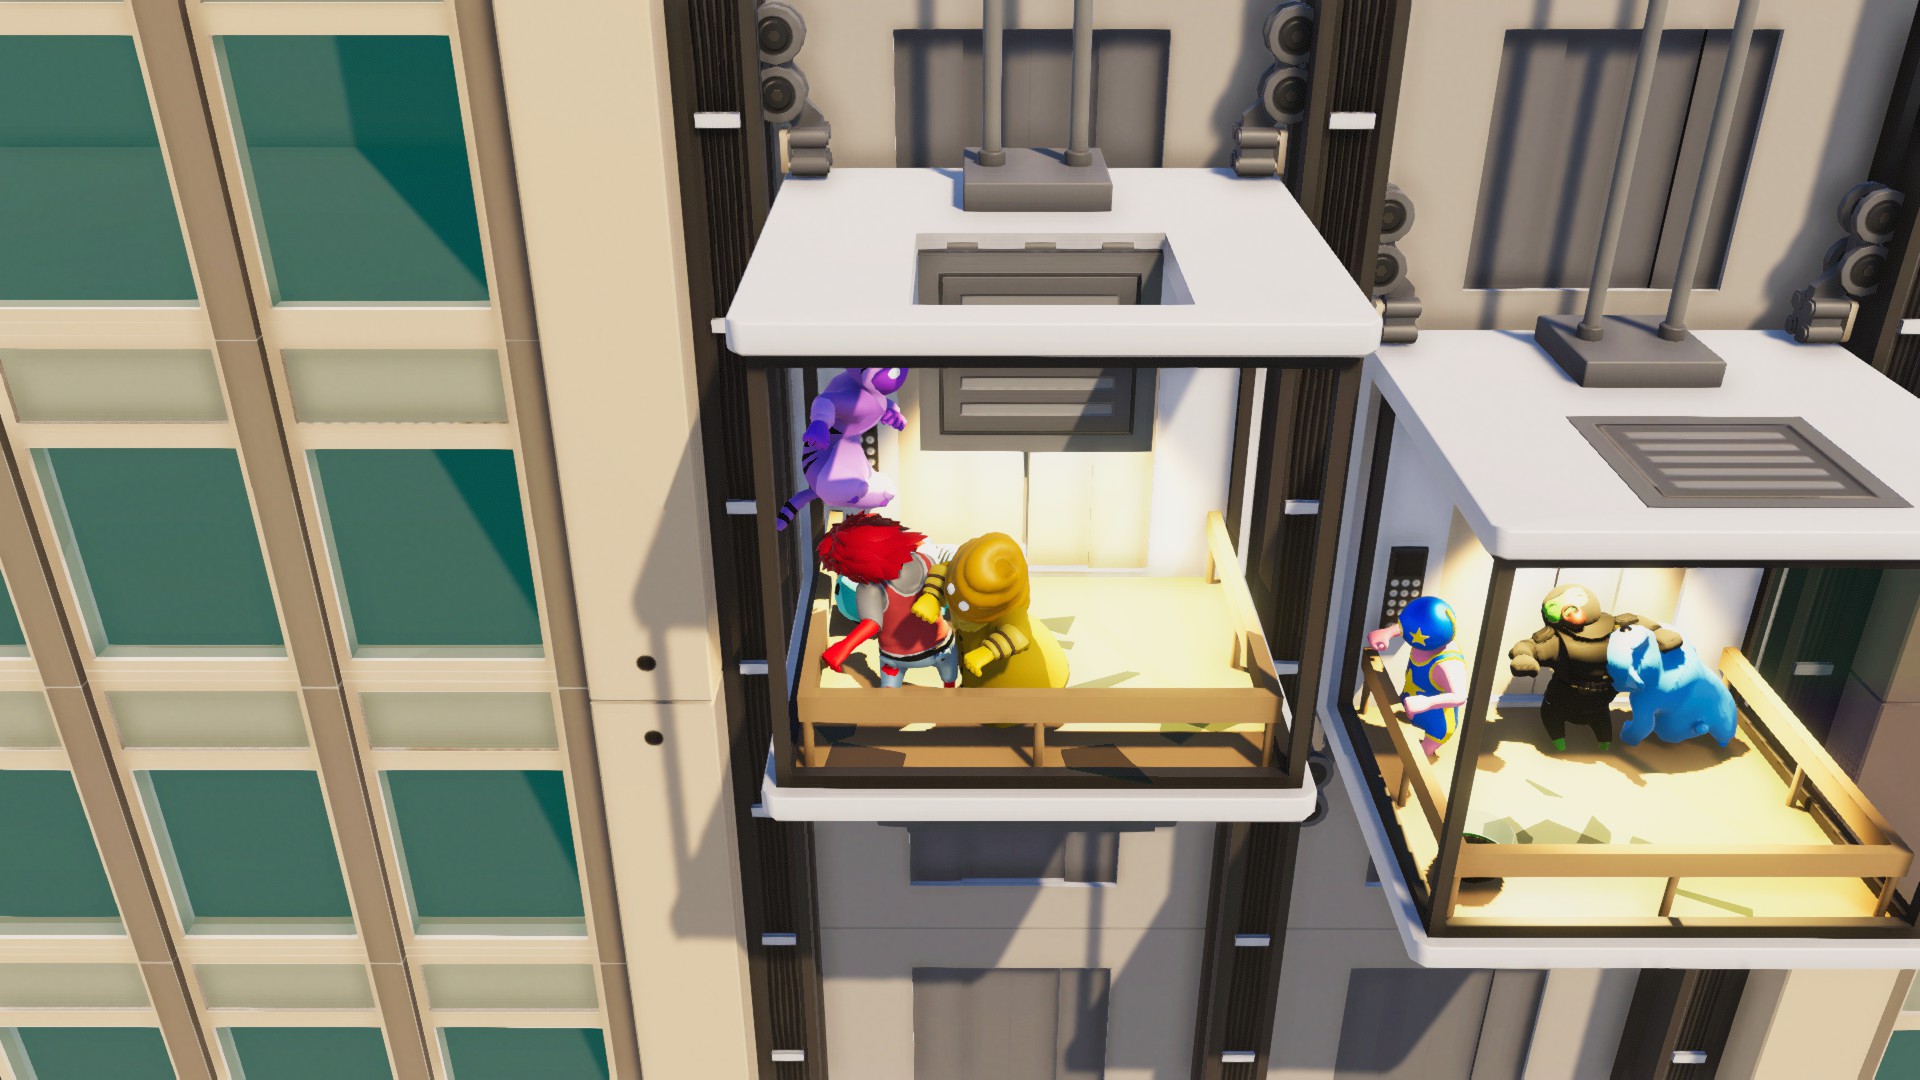 gang beasts ps4 price